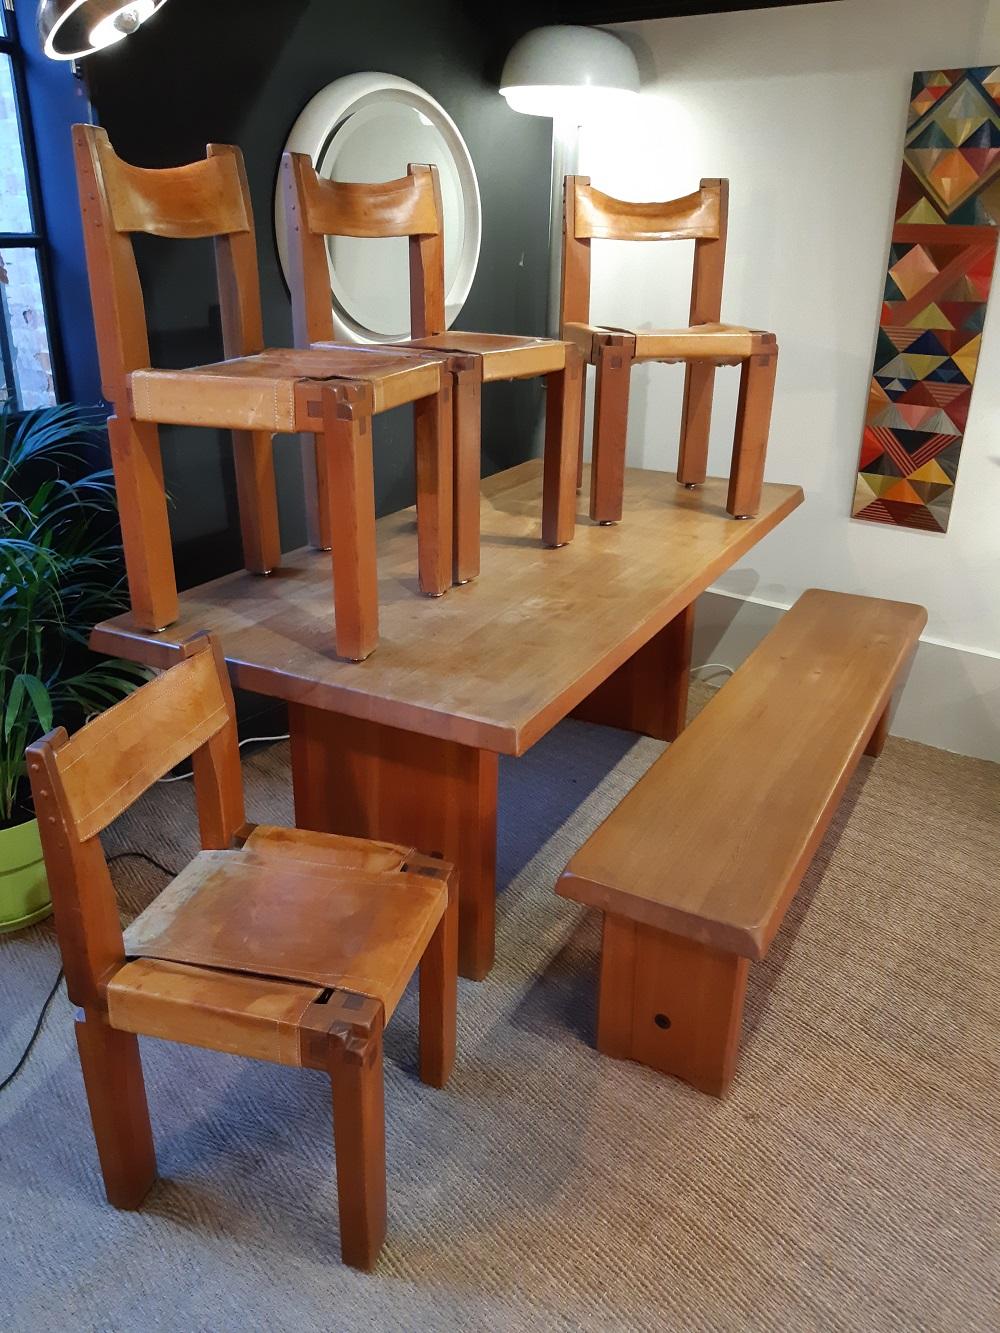 A rare complete dining room set by Pierre Chapo.
3 chairs S11, 1 table T14, 1 bench S14 matched. Authentic pieces from the 60s in solid elm.
Signs of wear and traces of glass on the table.
Good patina on the leather with traces of use.
(There